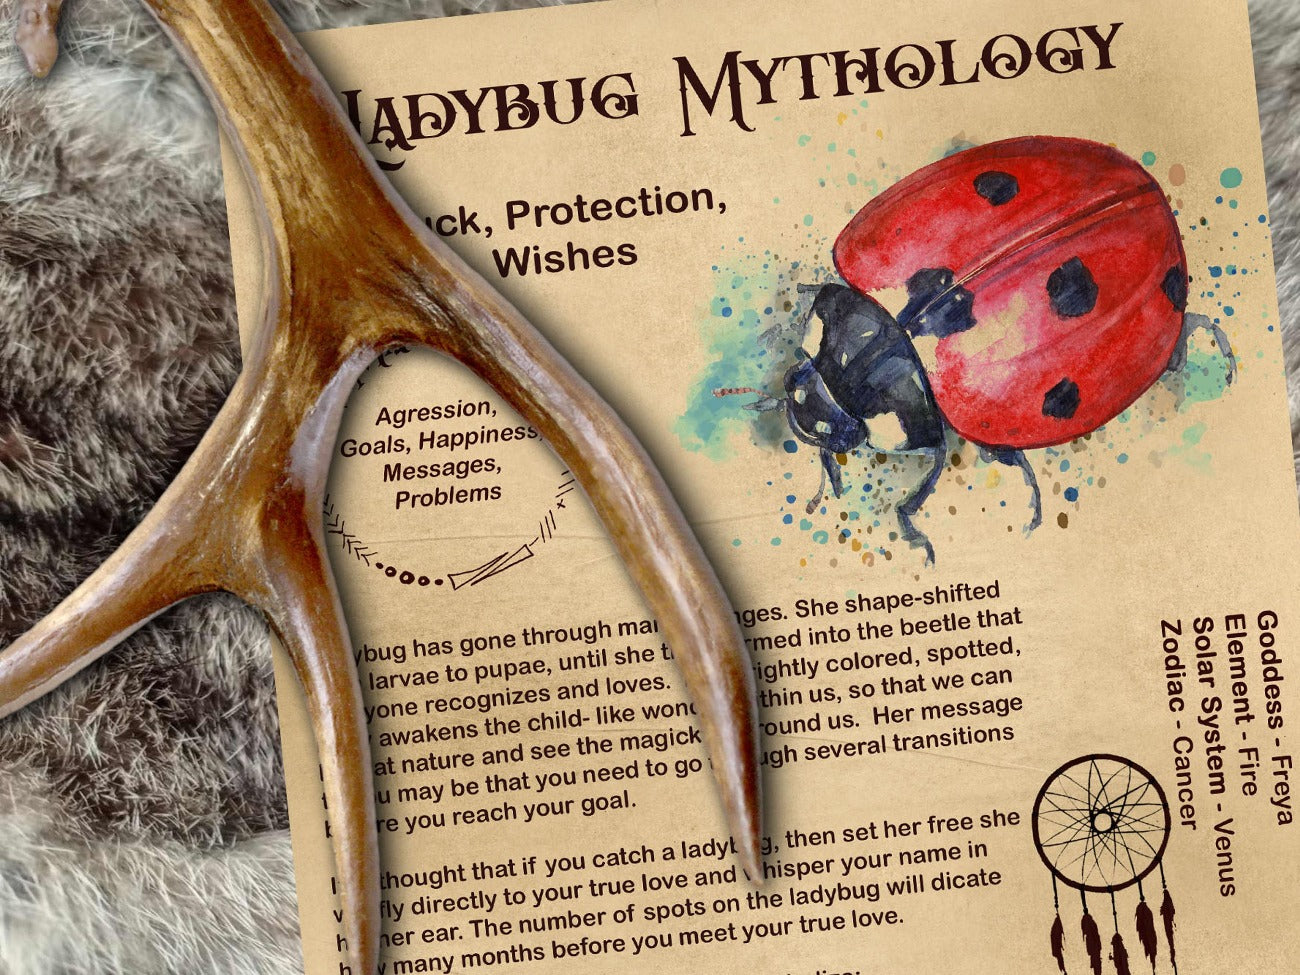 Ladybug Magick Myths & Correspondences 1 printable Book of Shadows Page is displayed in an ancient book on a fur rug with a deer antler. Shown with the parchment background.